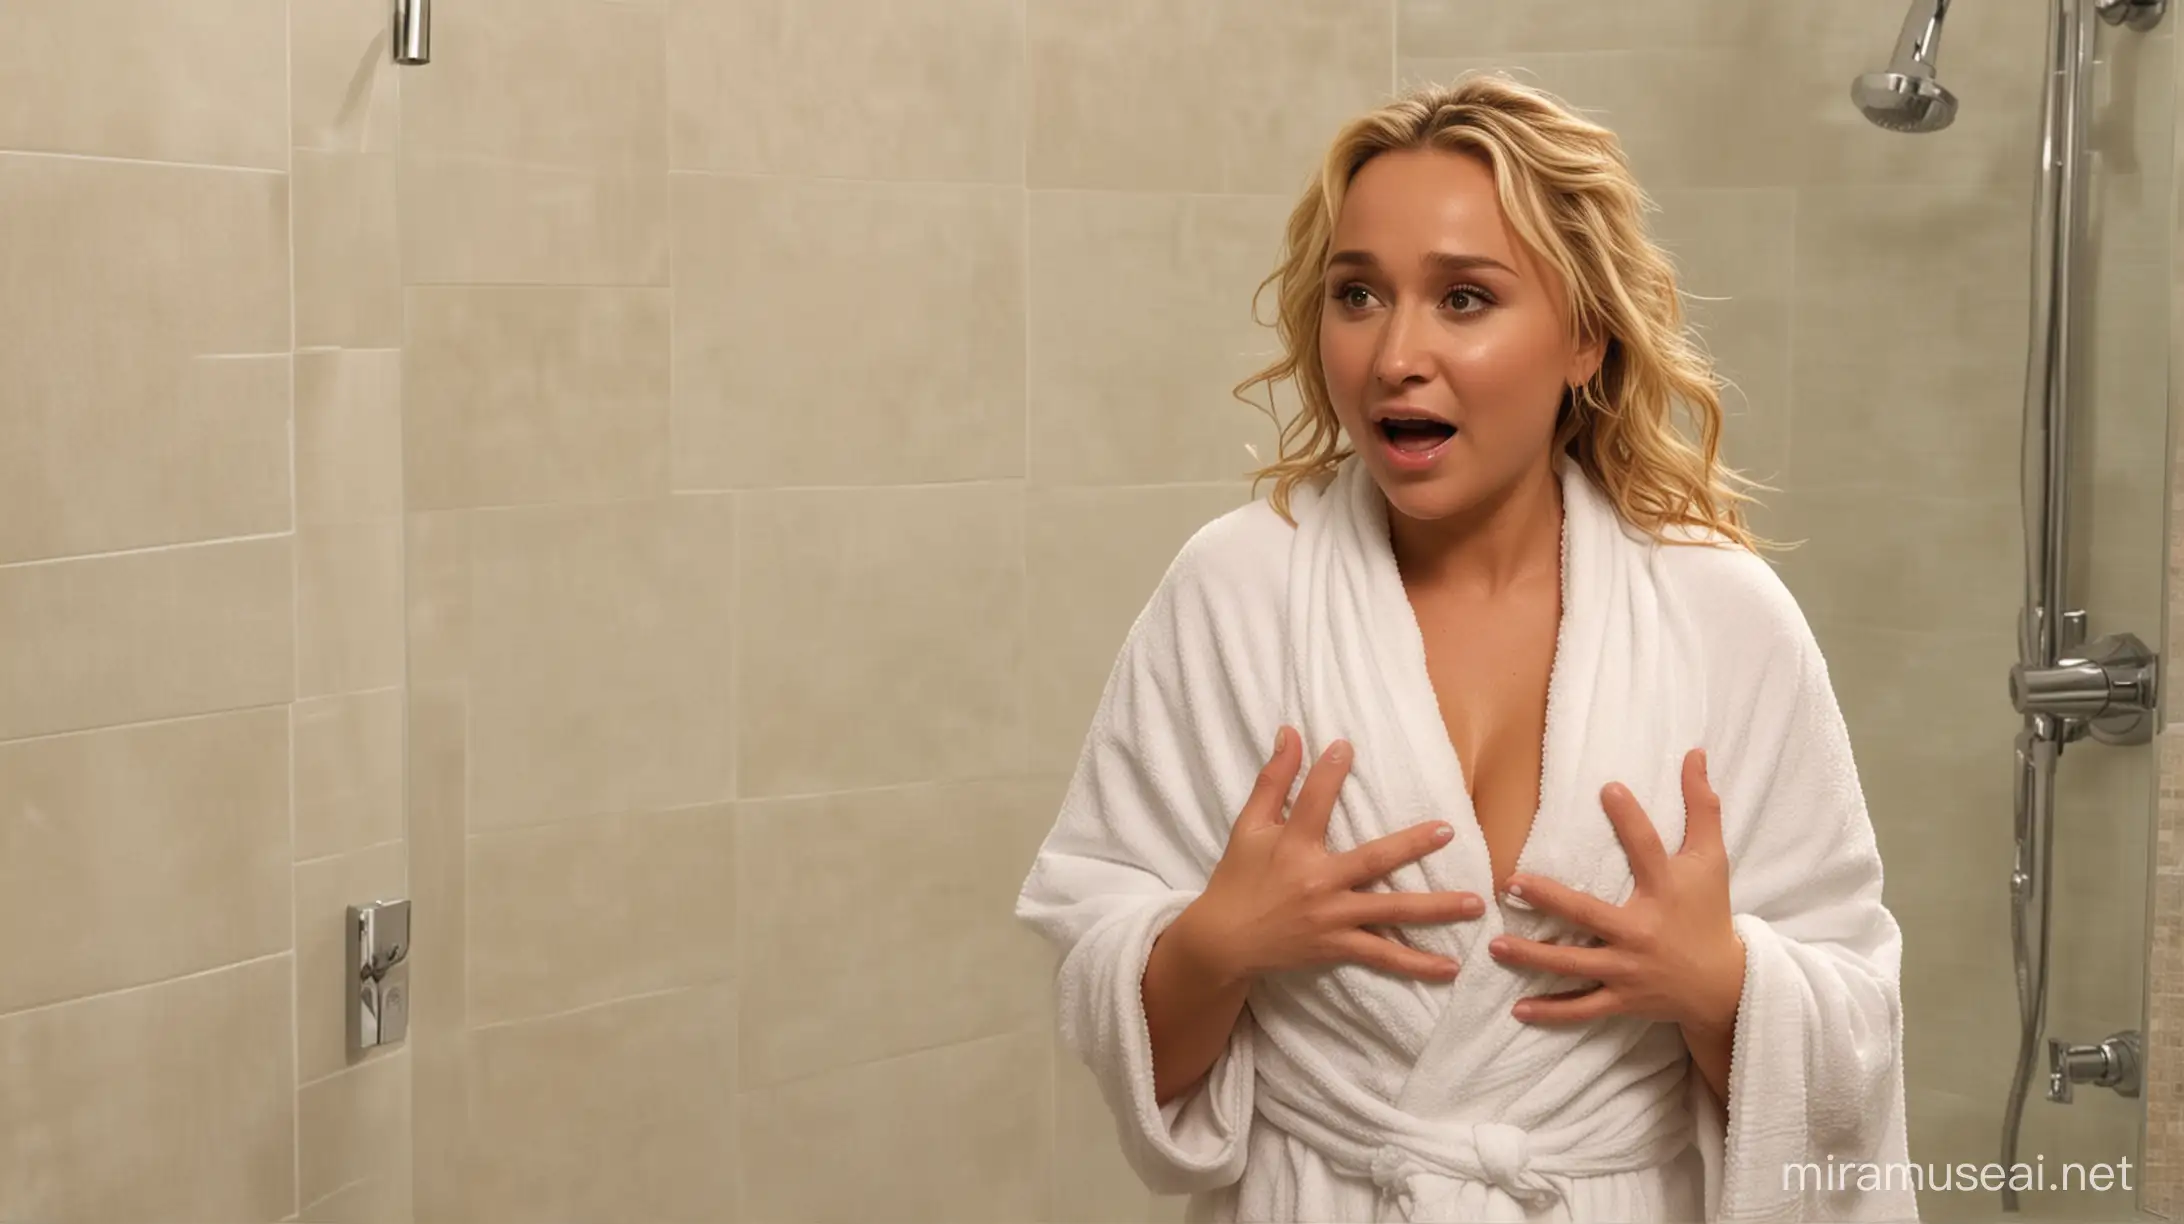 Hayden Panettiere walking out of the shower wrapped in a towel, the towel has slipped off  exposing her breasts, she is looking shocked